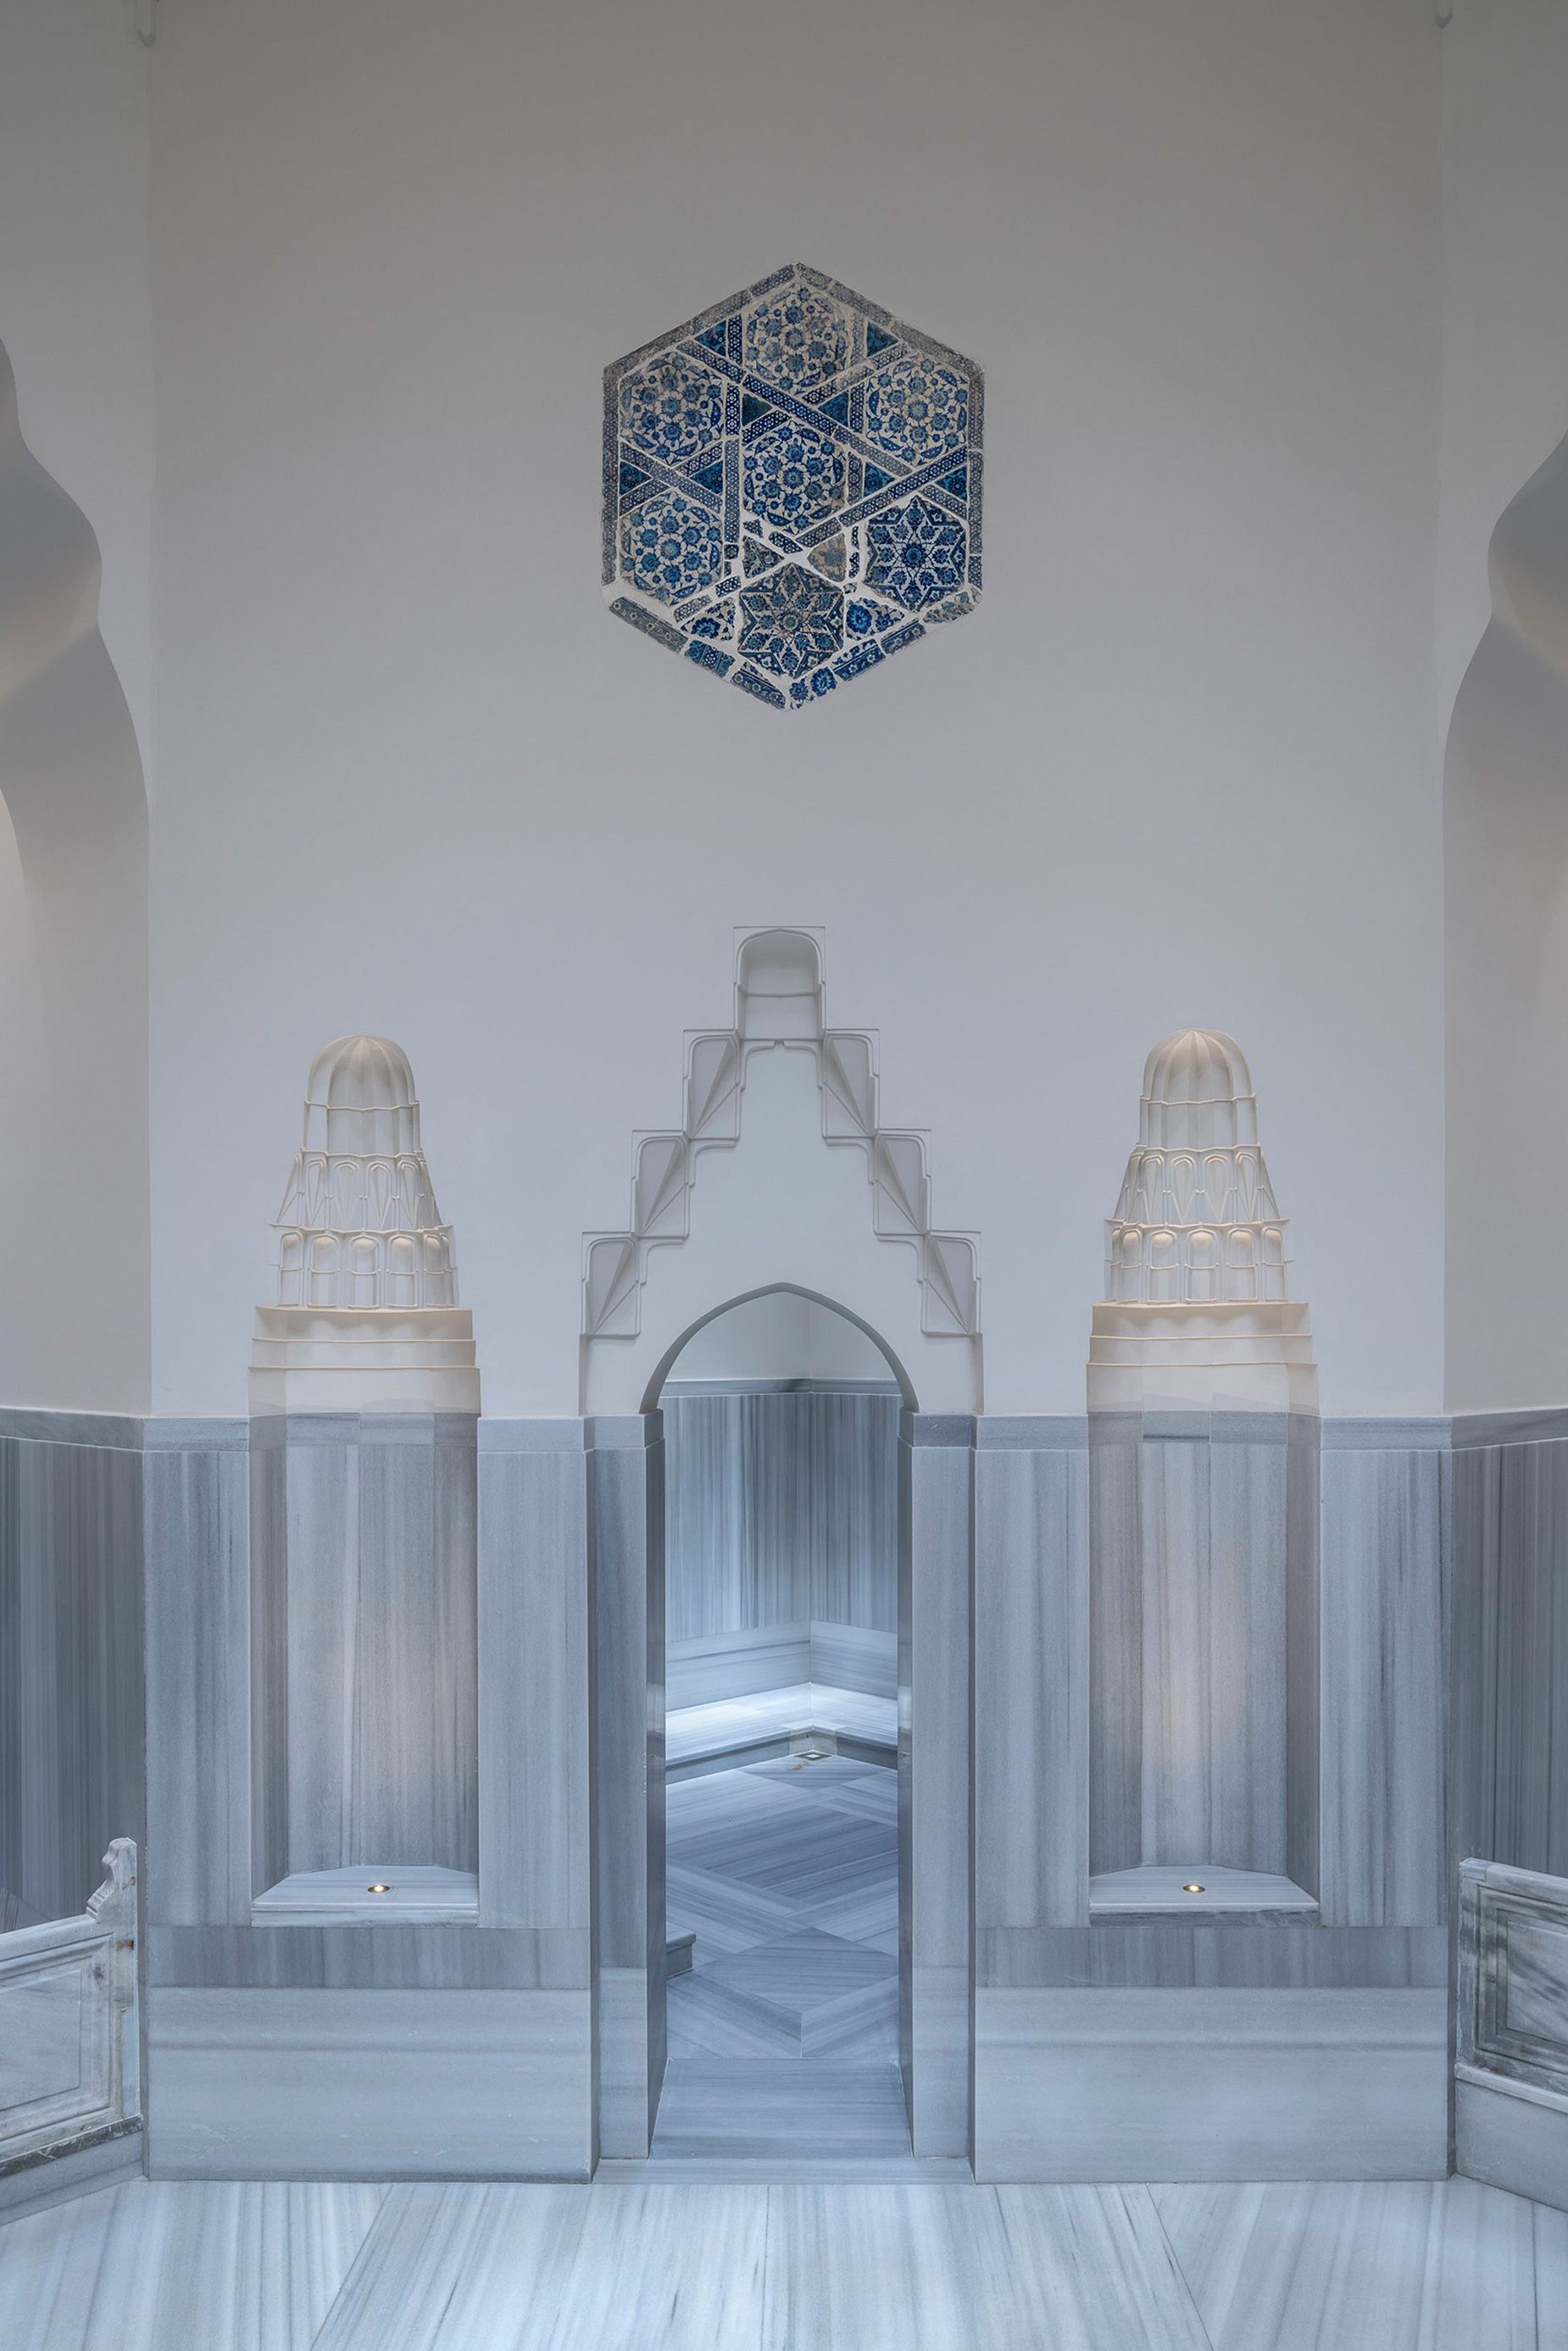 The 500-year-old hamam bringing Istanbul's past to life